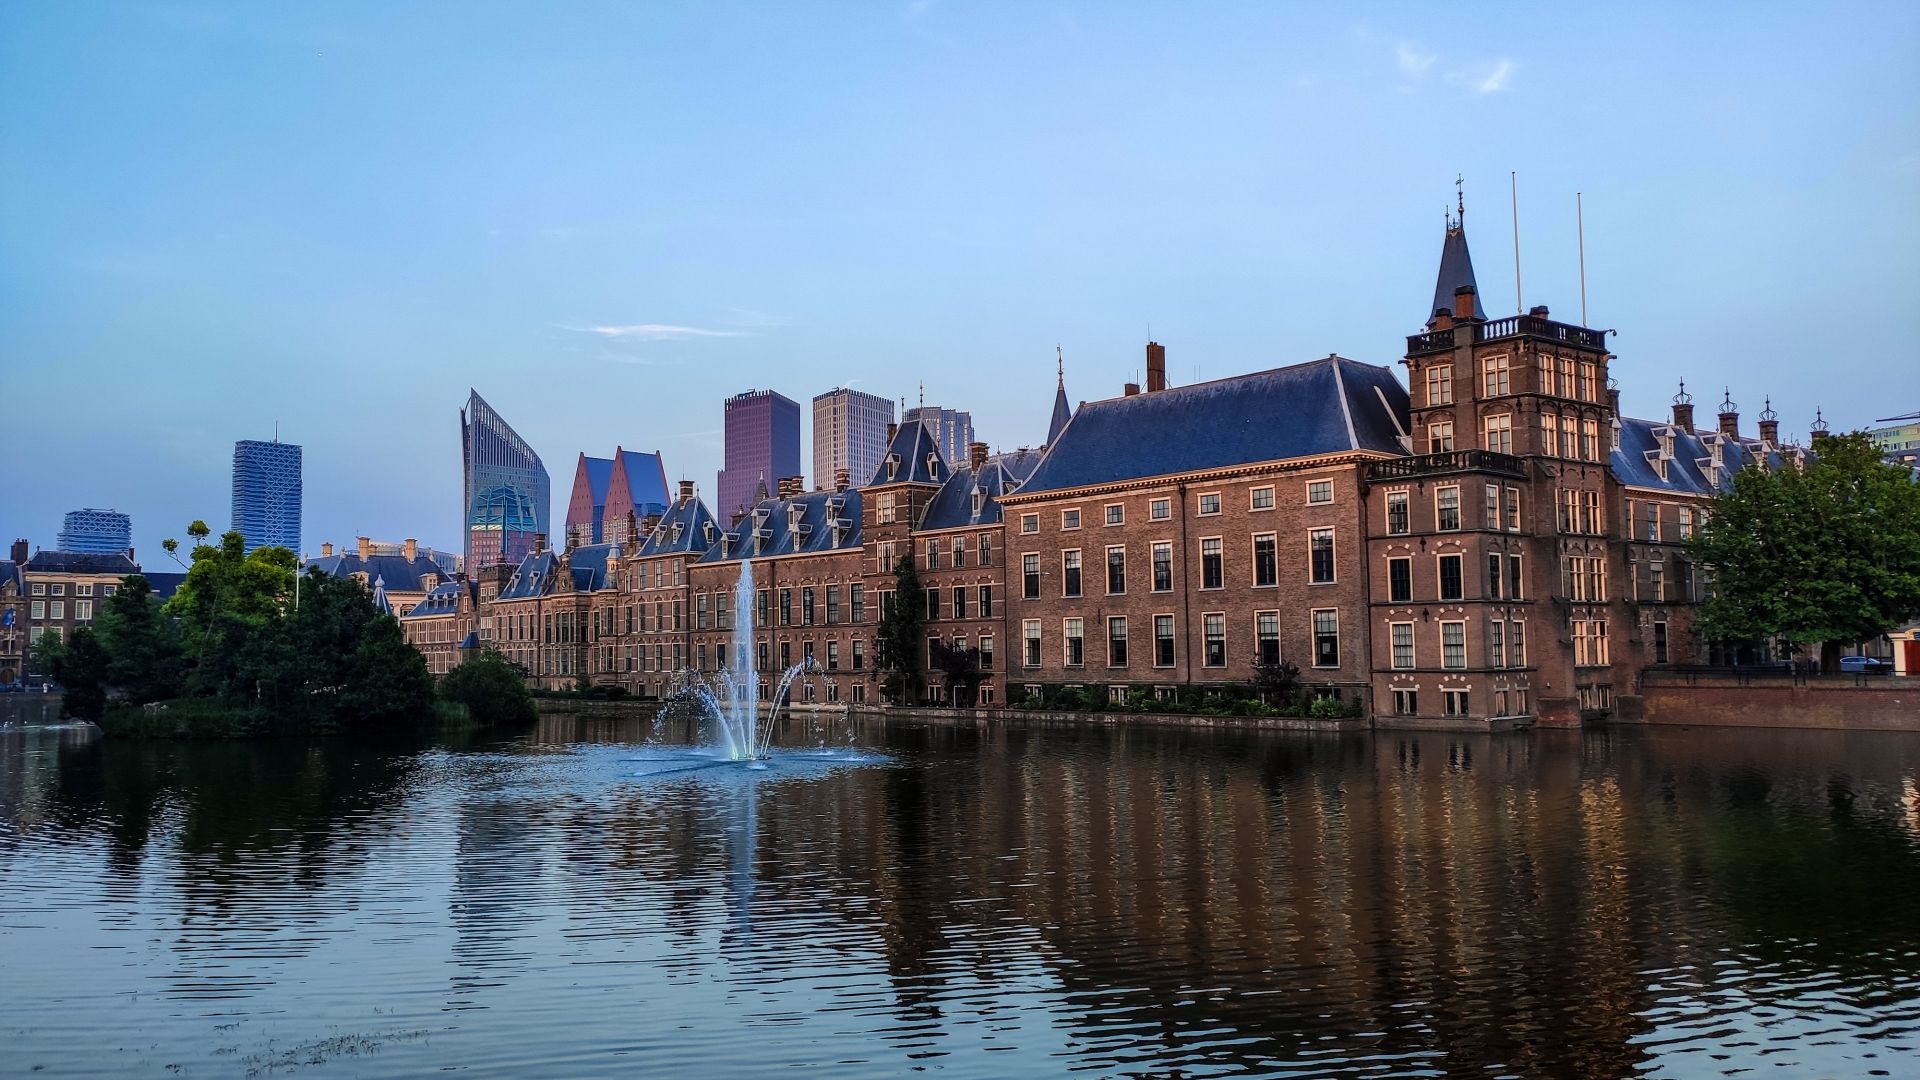 The Hague tours, City view, Day trips, Sightseeing in the Hague, 1920x1080 Full HD Desktop